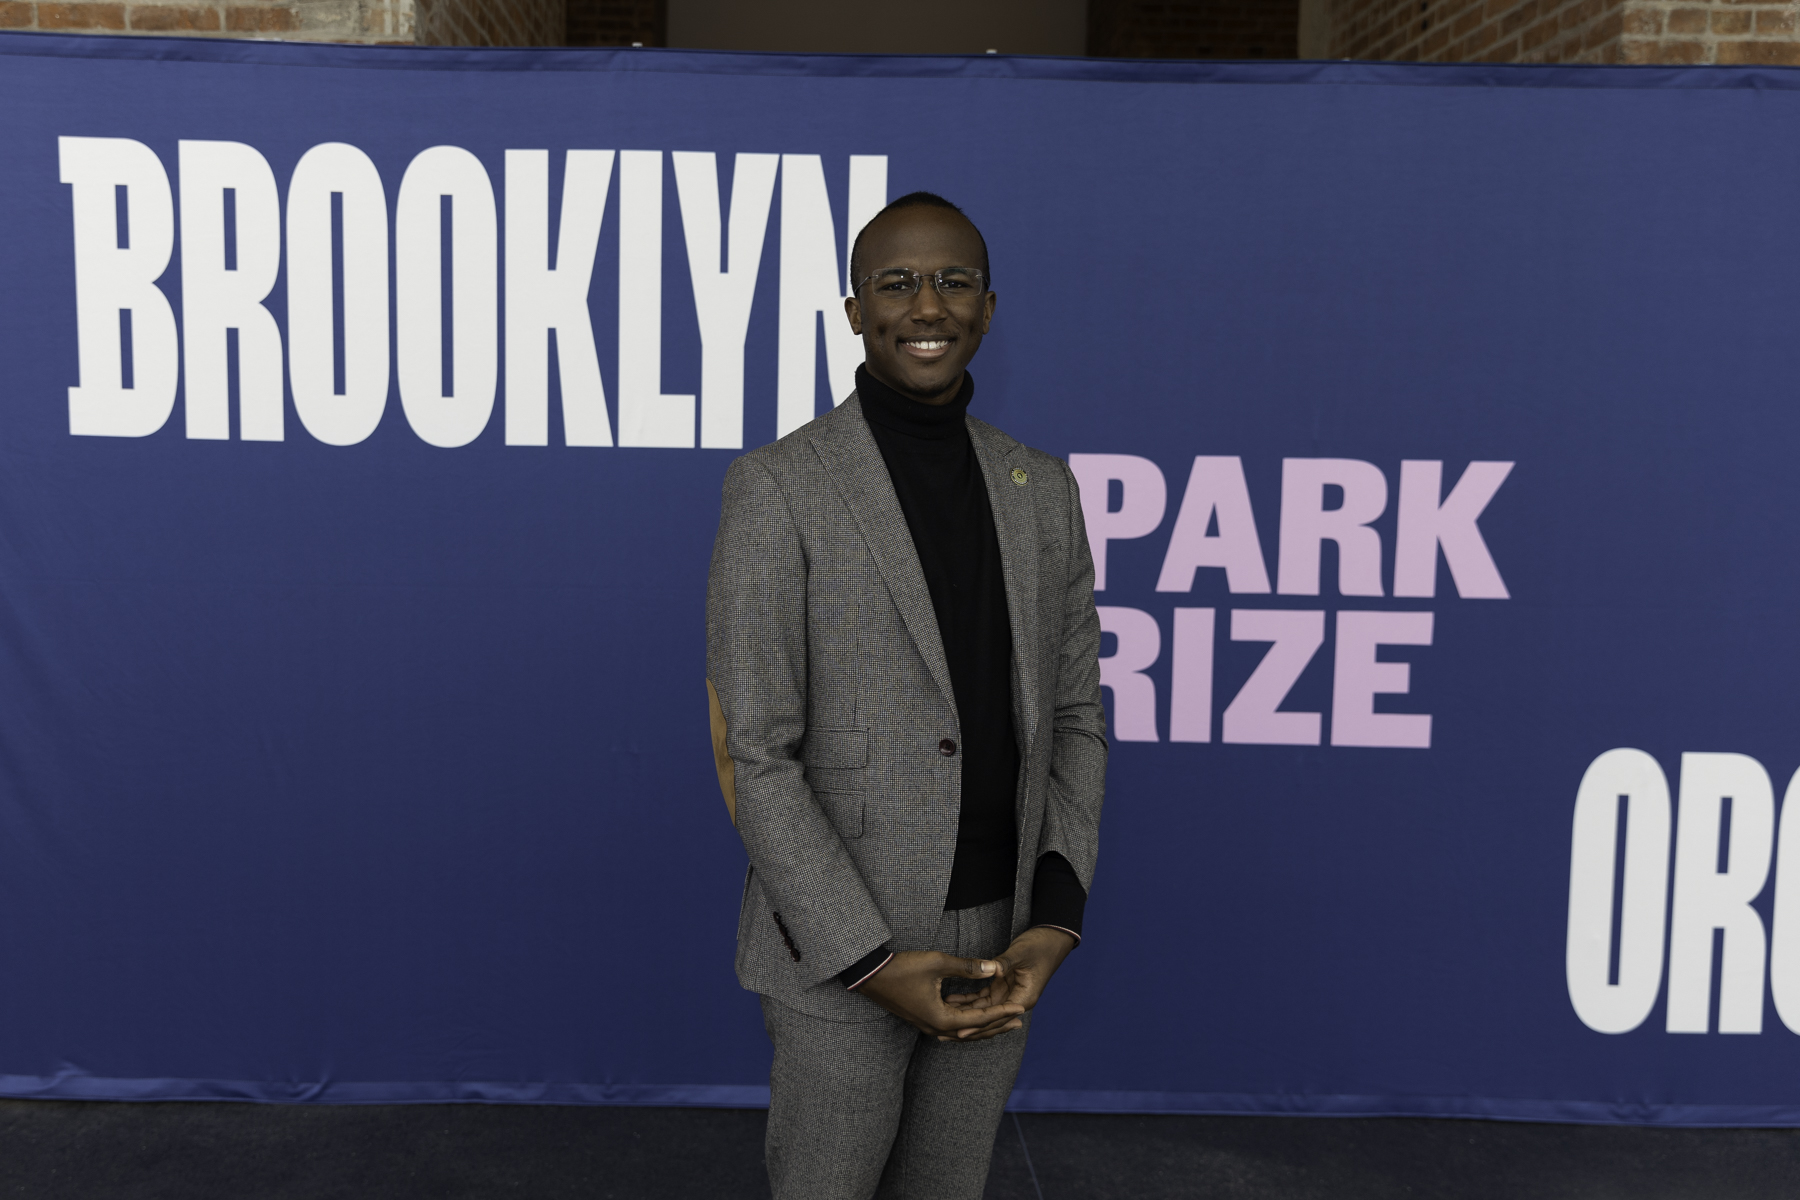 Man in a grey suit and black turtleneck posing in front of a "brooklyn park prize" banner.